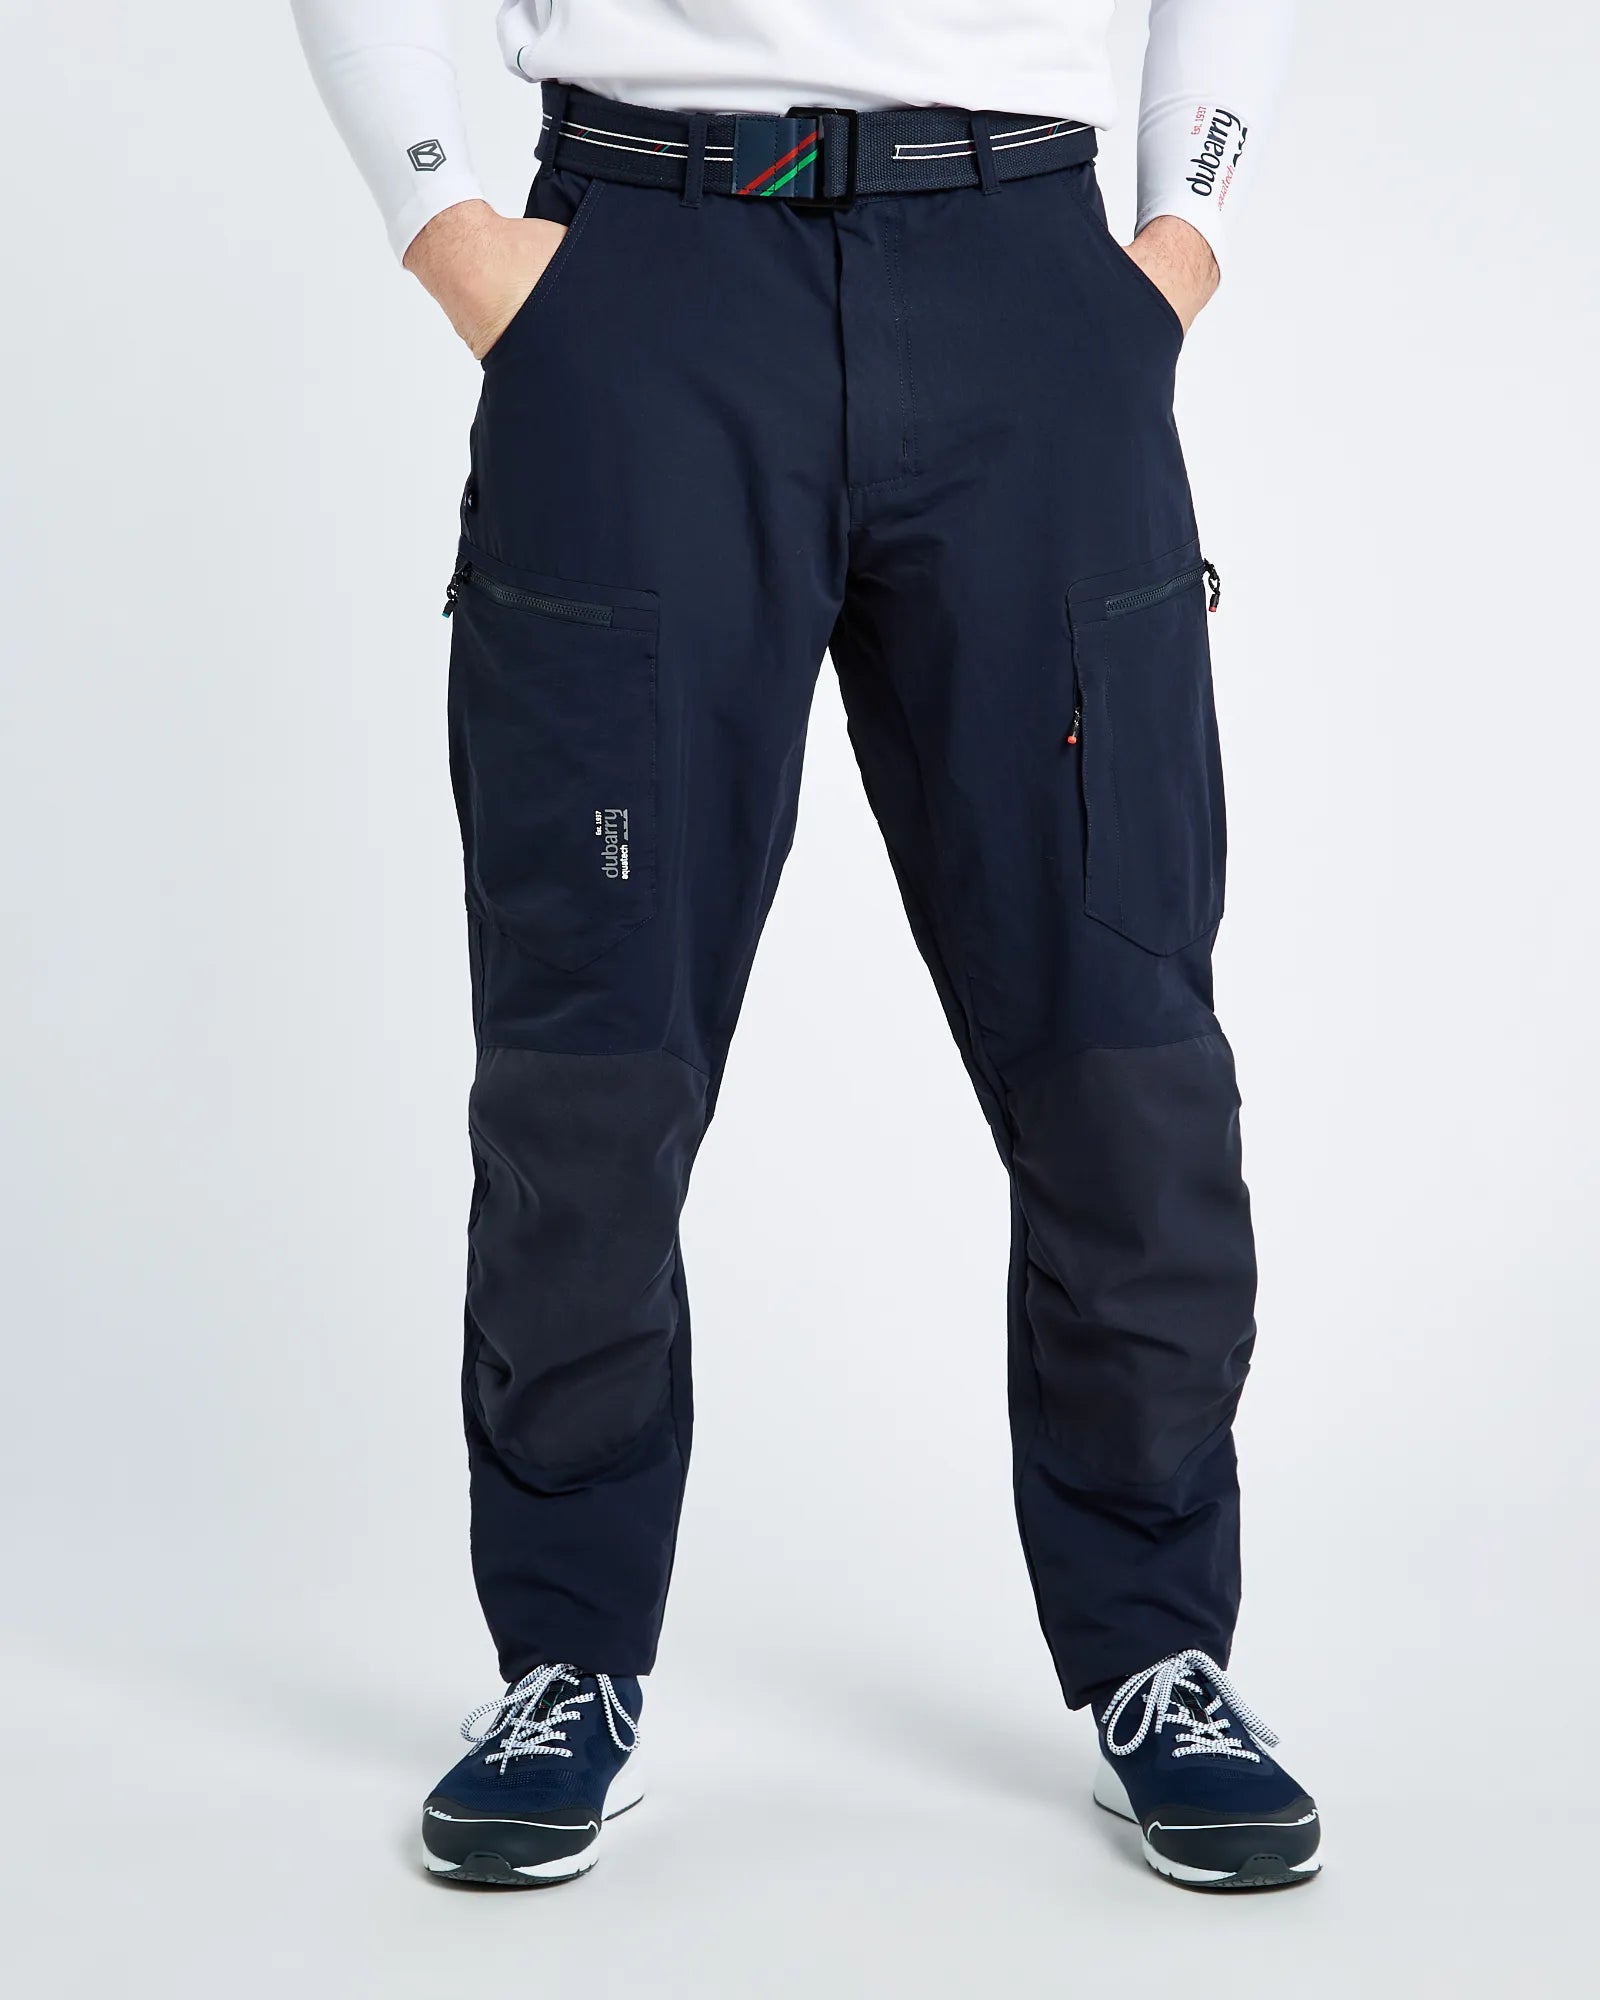 Dubrovnik Trousers - Navy